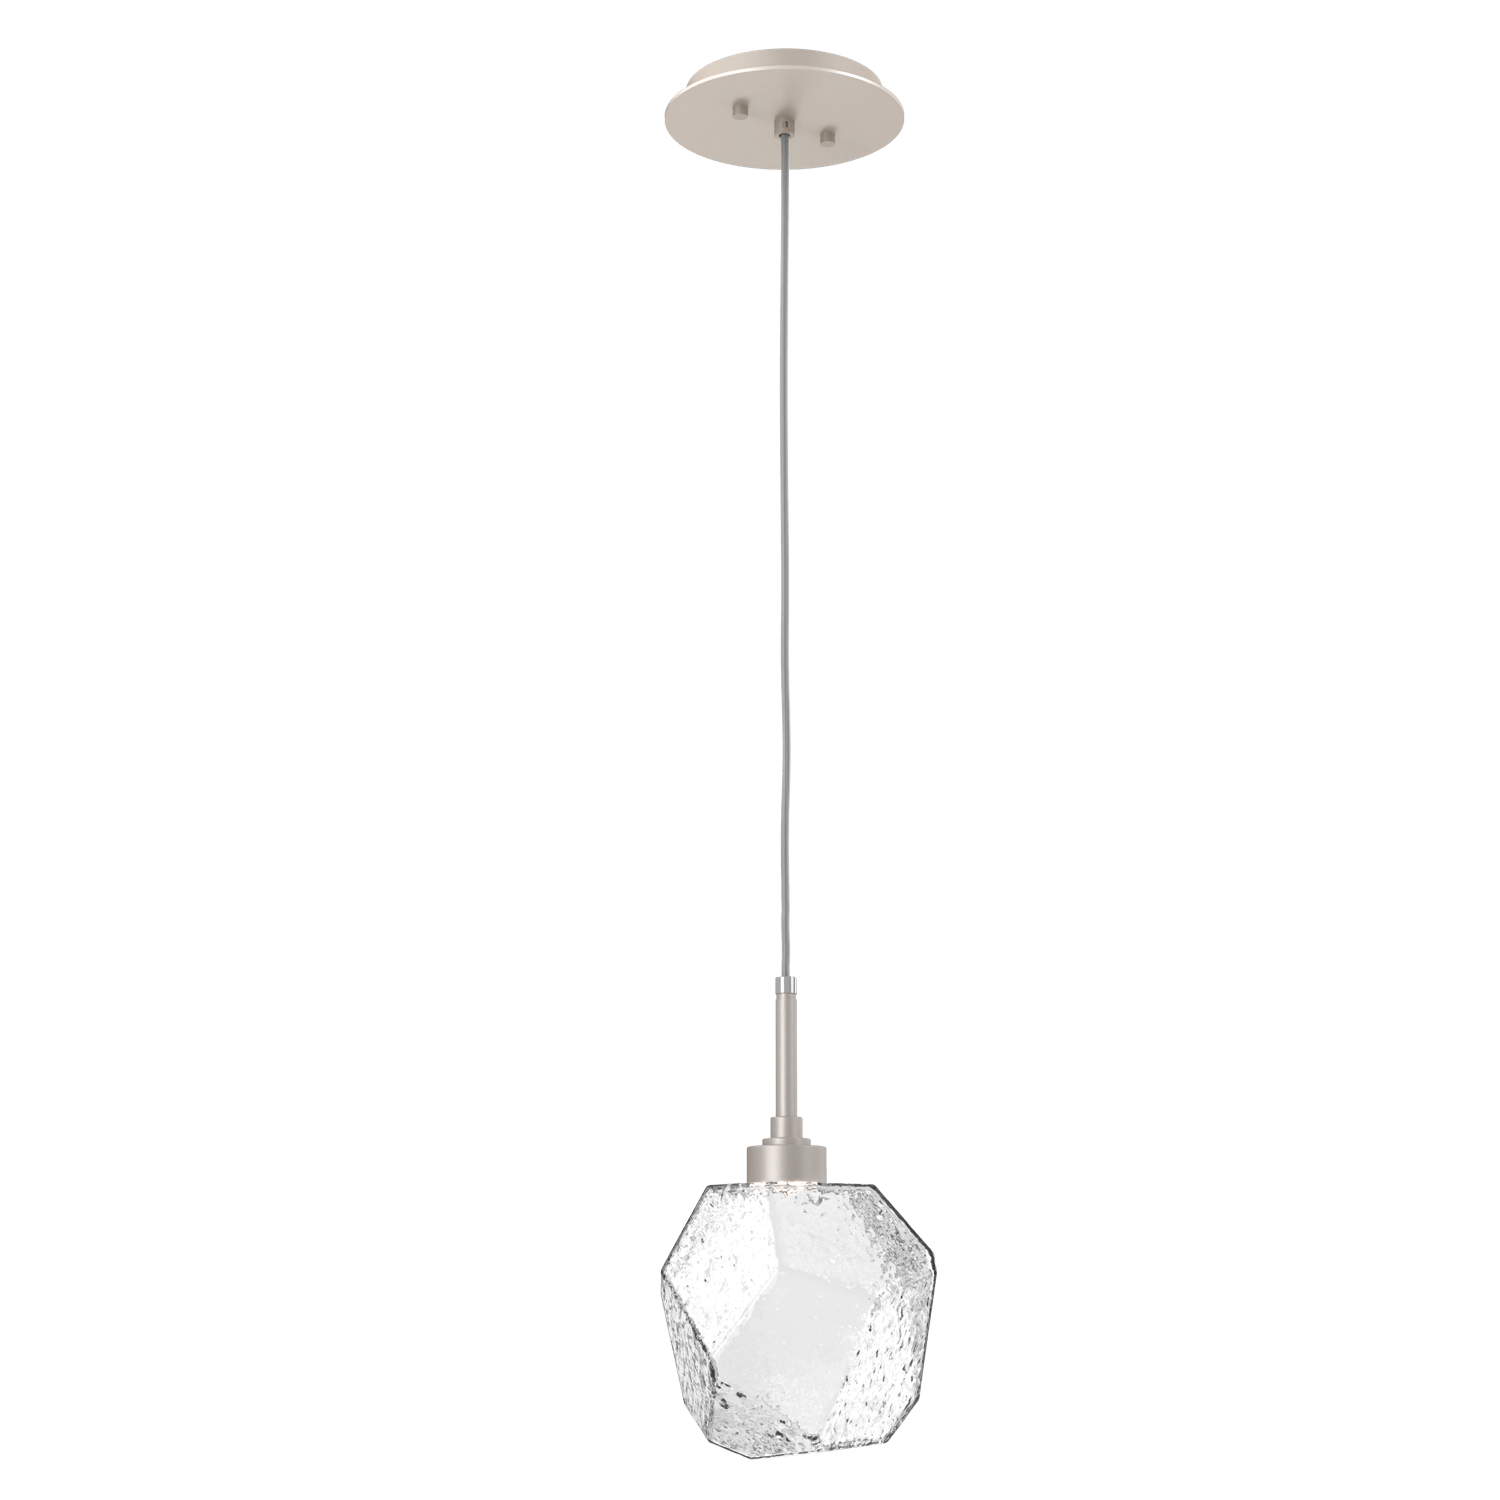 LAB0039-01-BS-C-Hammerton-Studio-Gem-pendant-light-with-metallic-beige-silver-finish-and-clear-blown-glass-shades-and-LED-lamping